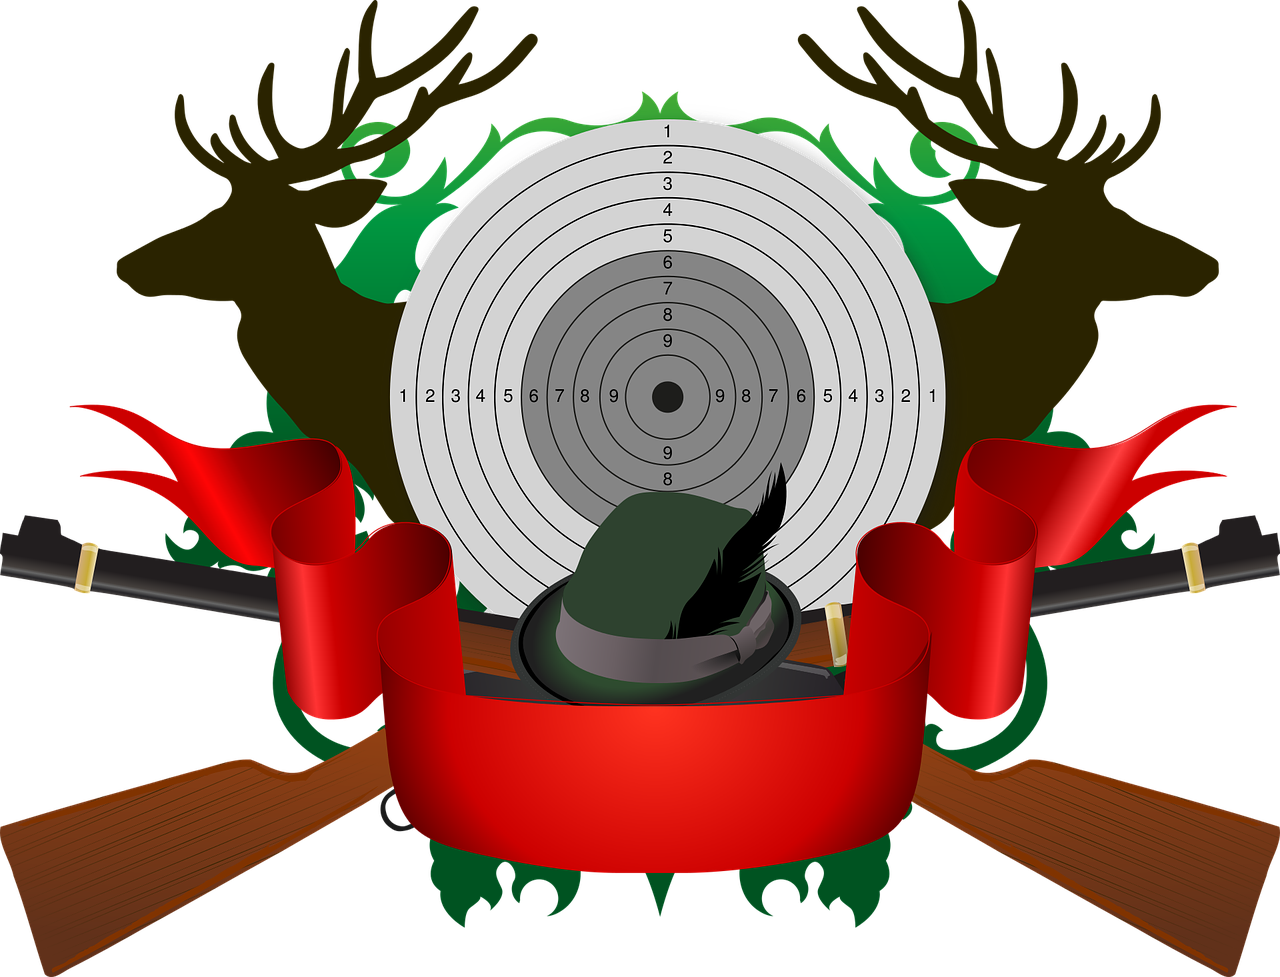 Red, green, and black graphic of rifles, deer, and a target